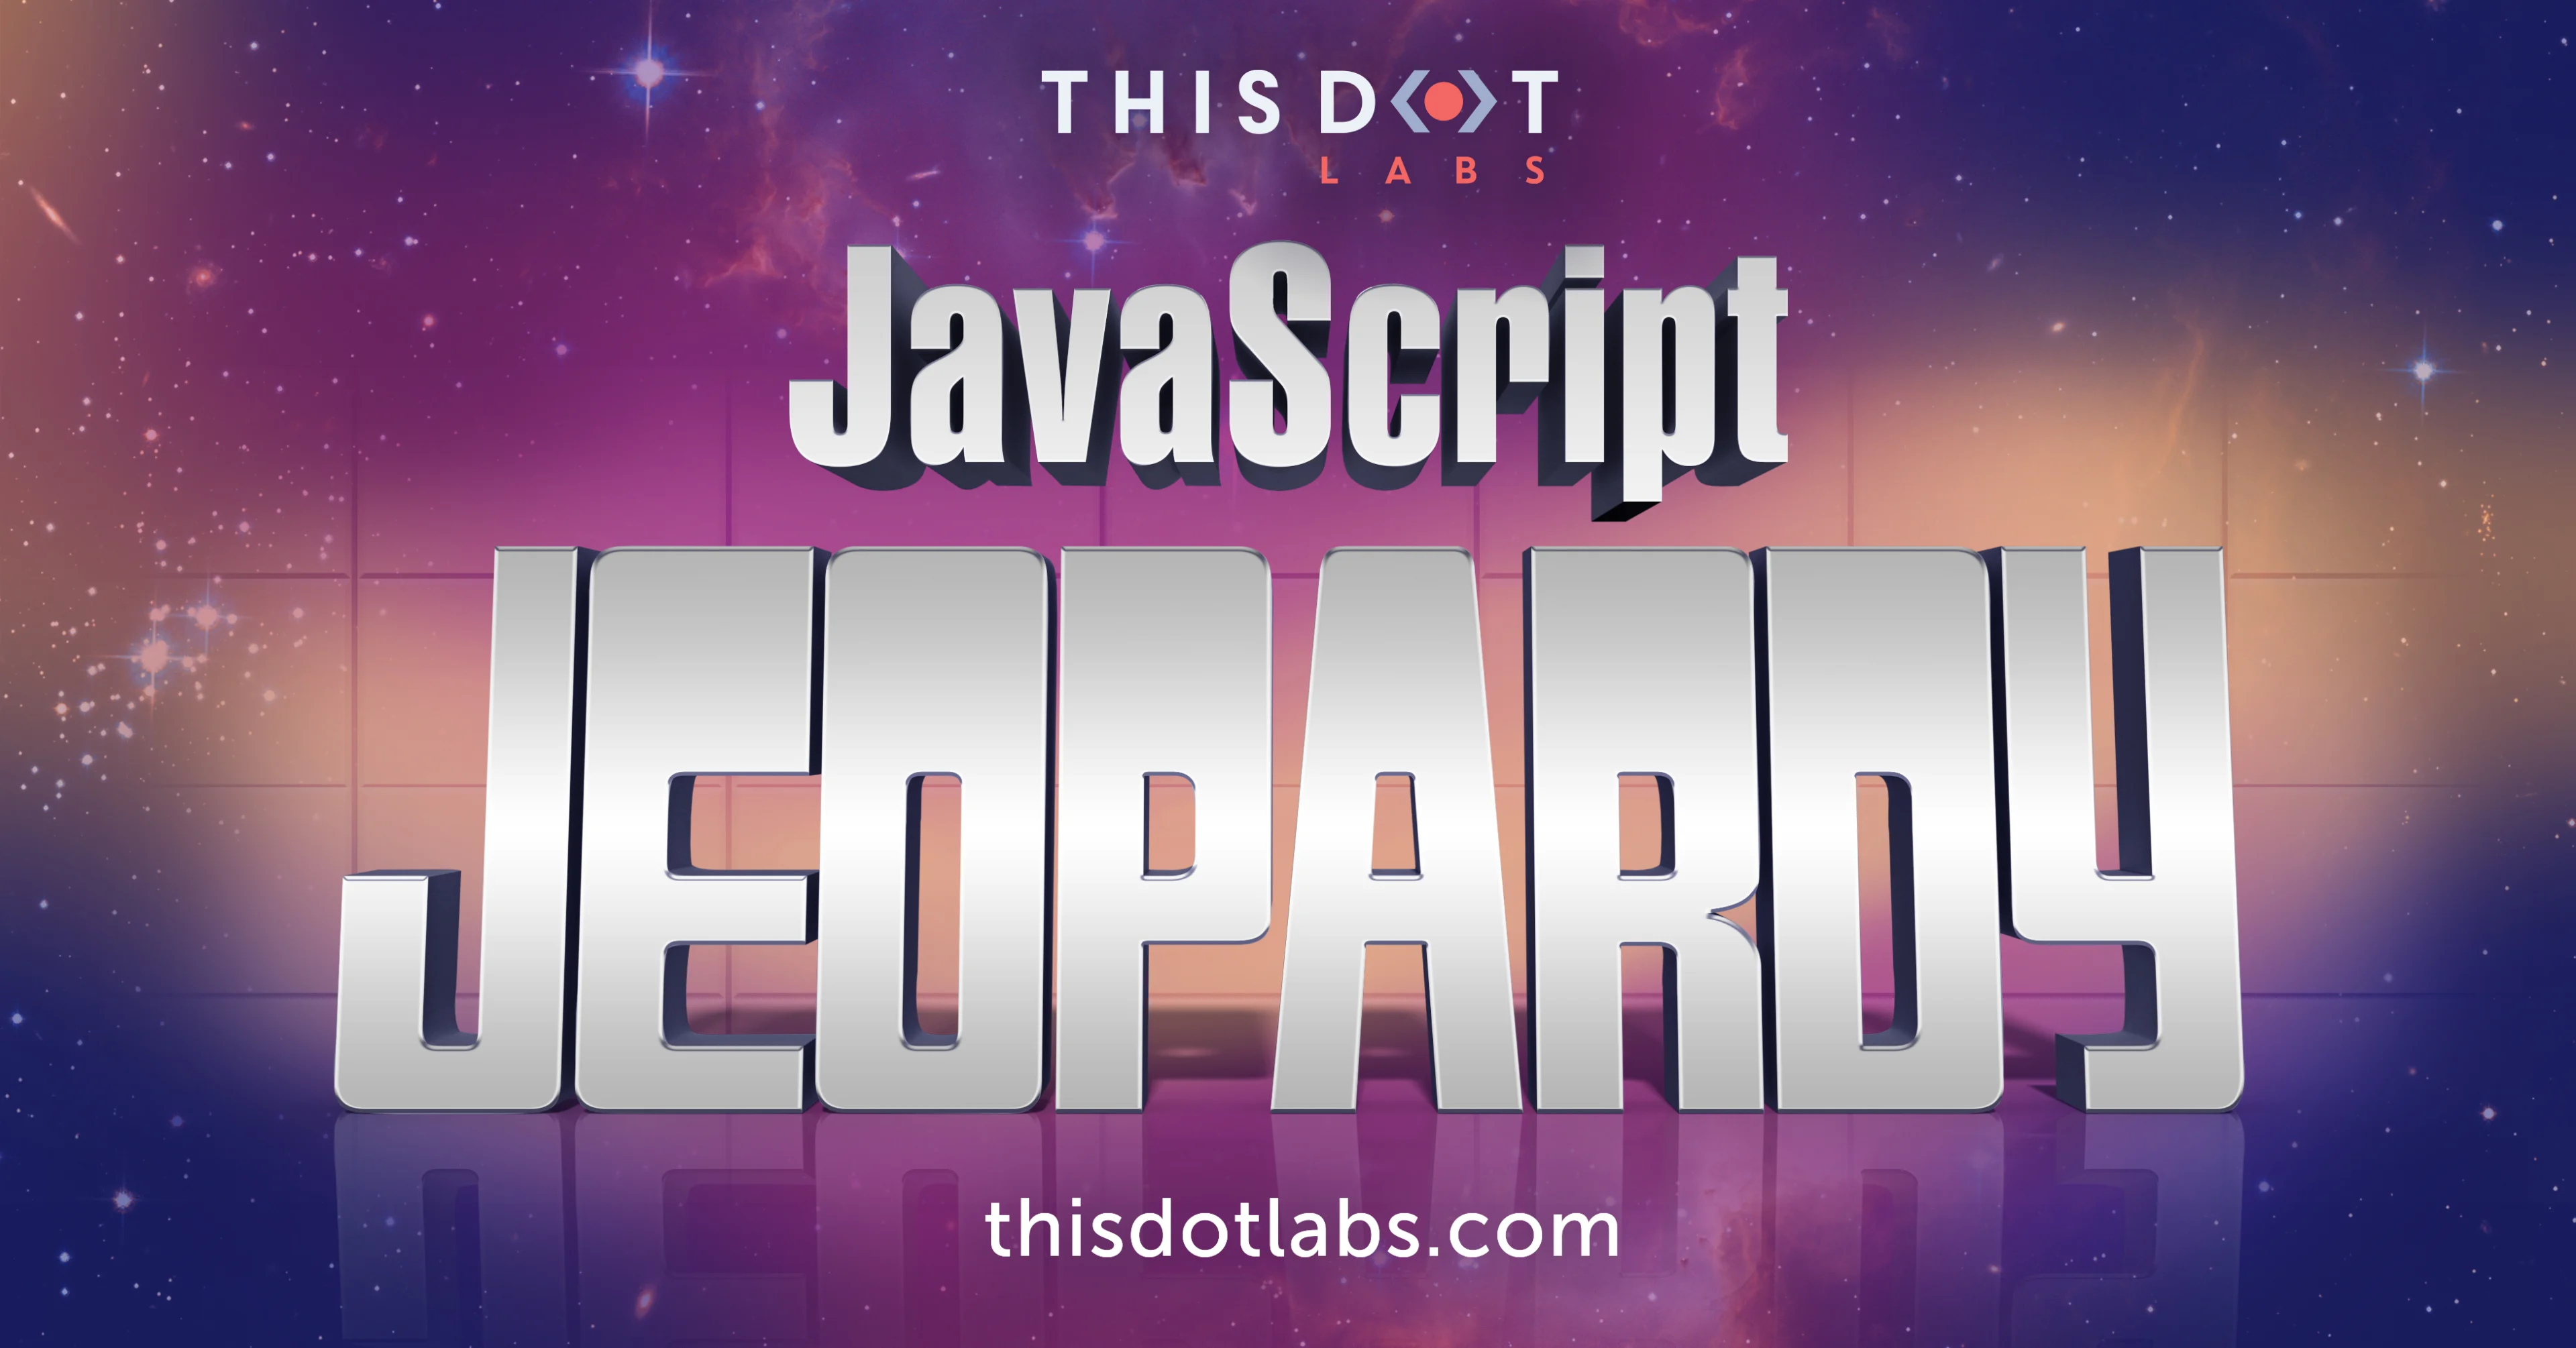 JavaScript Jeopardy - Prizes, Coding Competitions, and More!